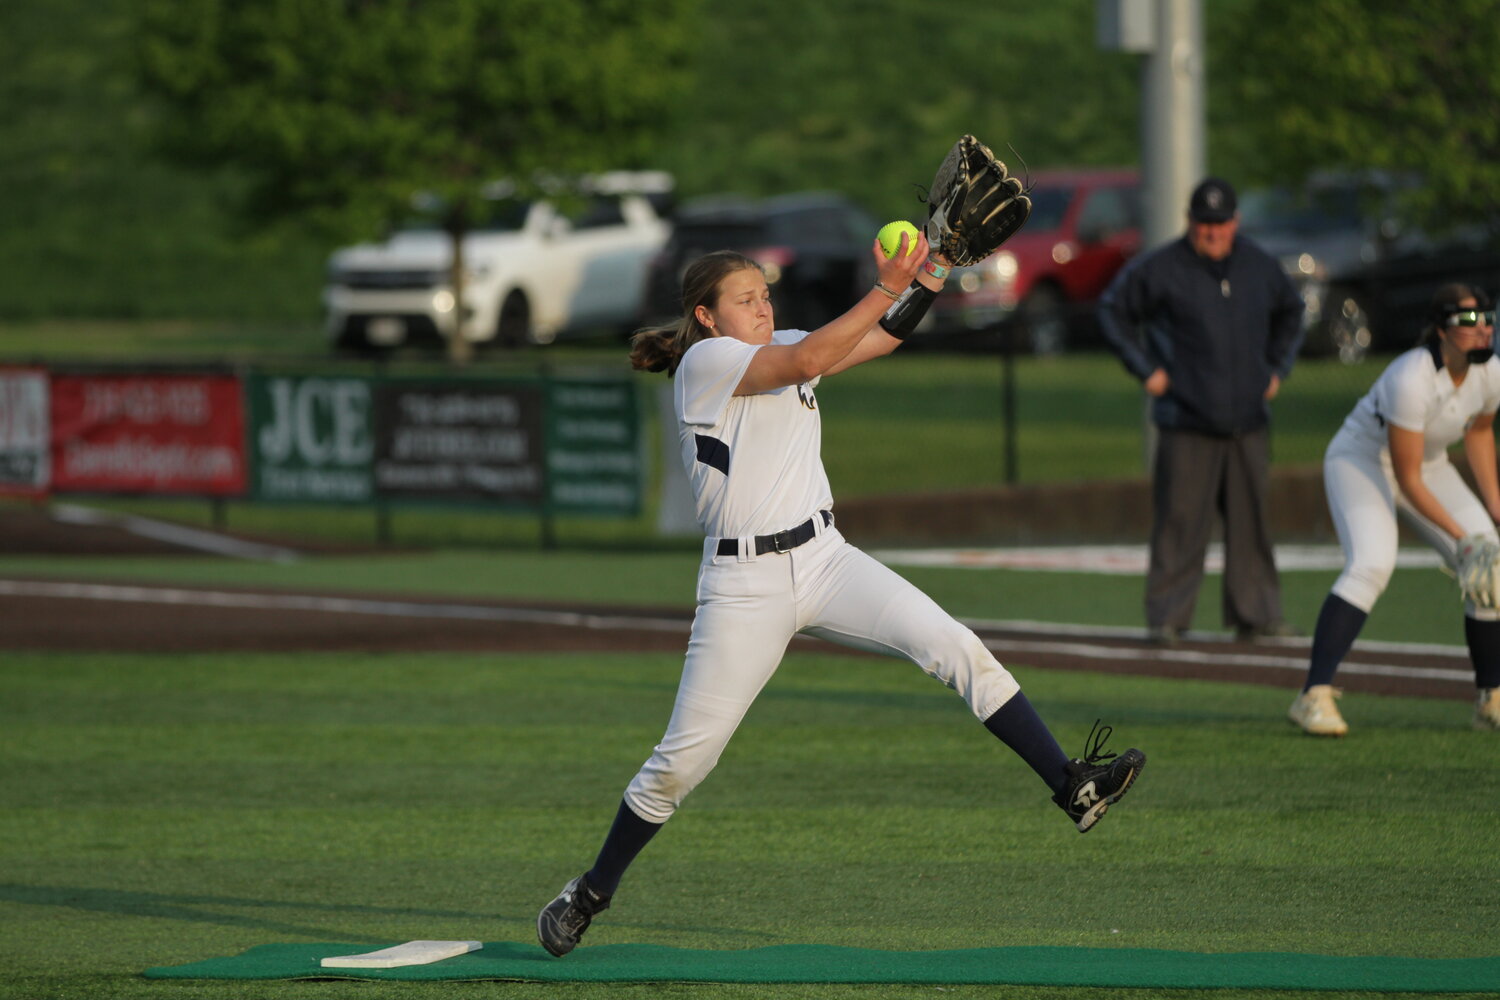 River Falls senior pitcher Ali Laube delivers one of her 86 pitches during the 9-0 victory against Saint Croix Falls at home on senior night. Laube pitched a four-hit complete-game shutout and struck out four opposing batters.